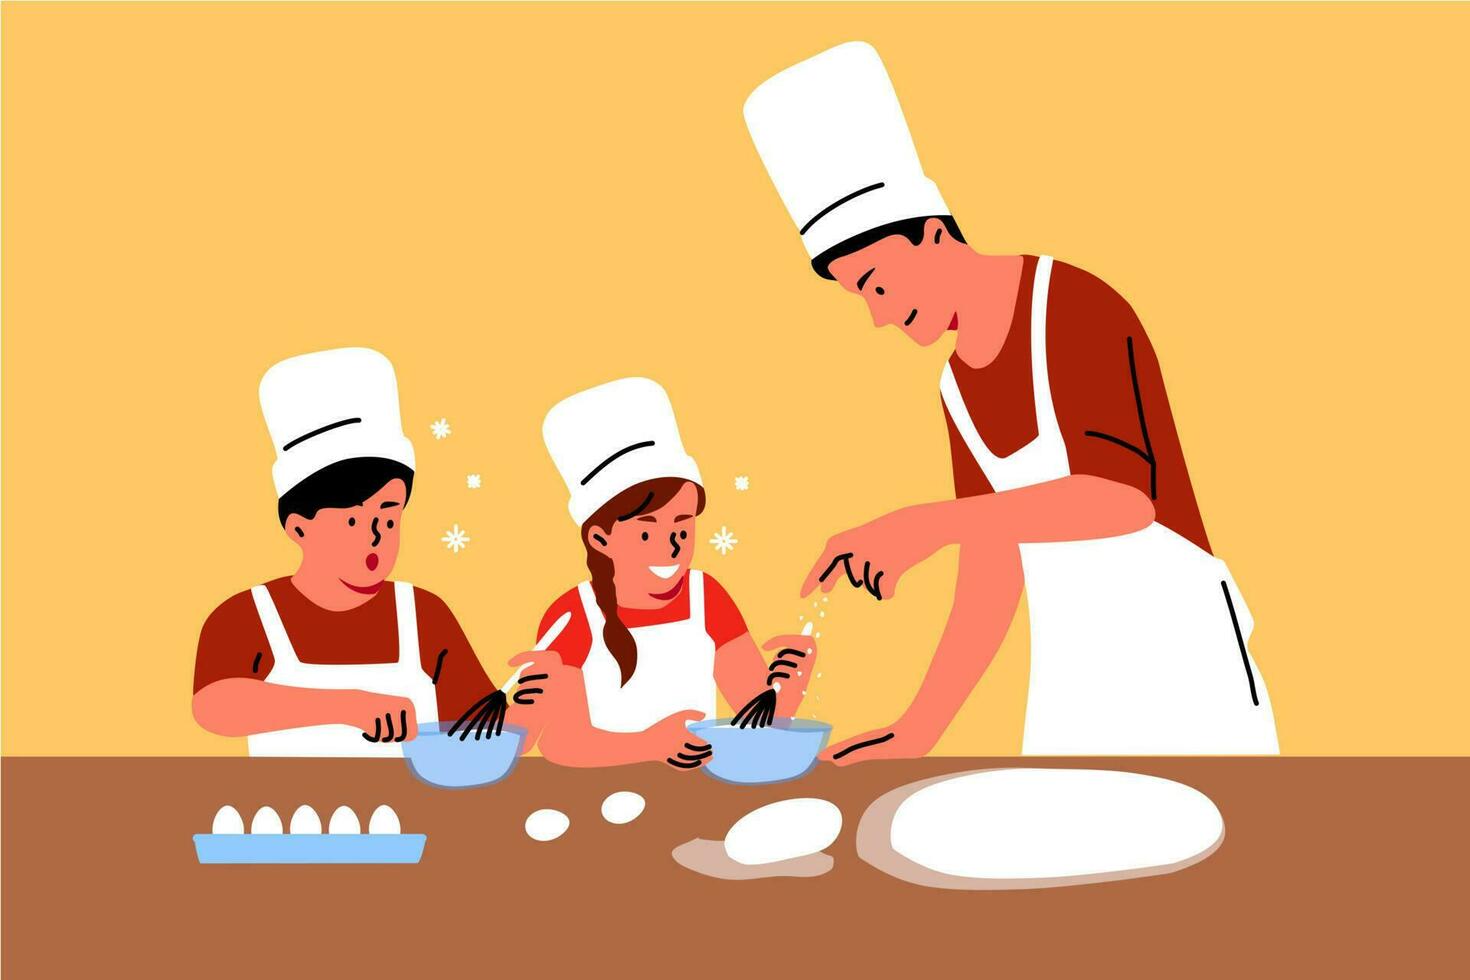 Family, education, fatherhood, childhood concept. Young man dad teaching cooking skills and meal receipts children boy girl kids. Preparing food for lunch dinner breakfast or fathers day illustration. vector